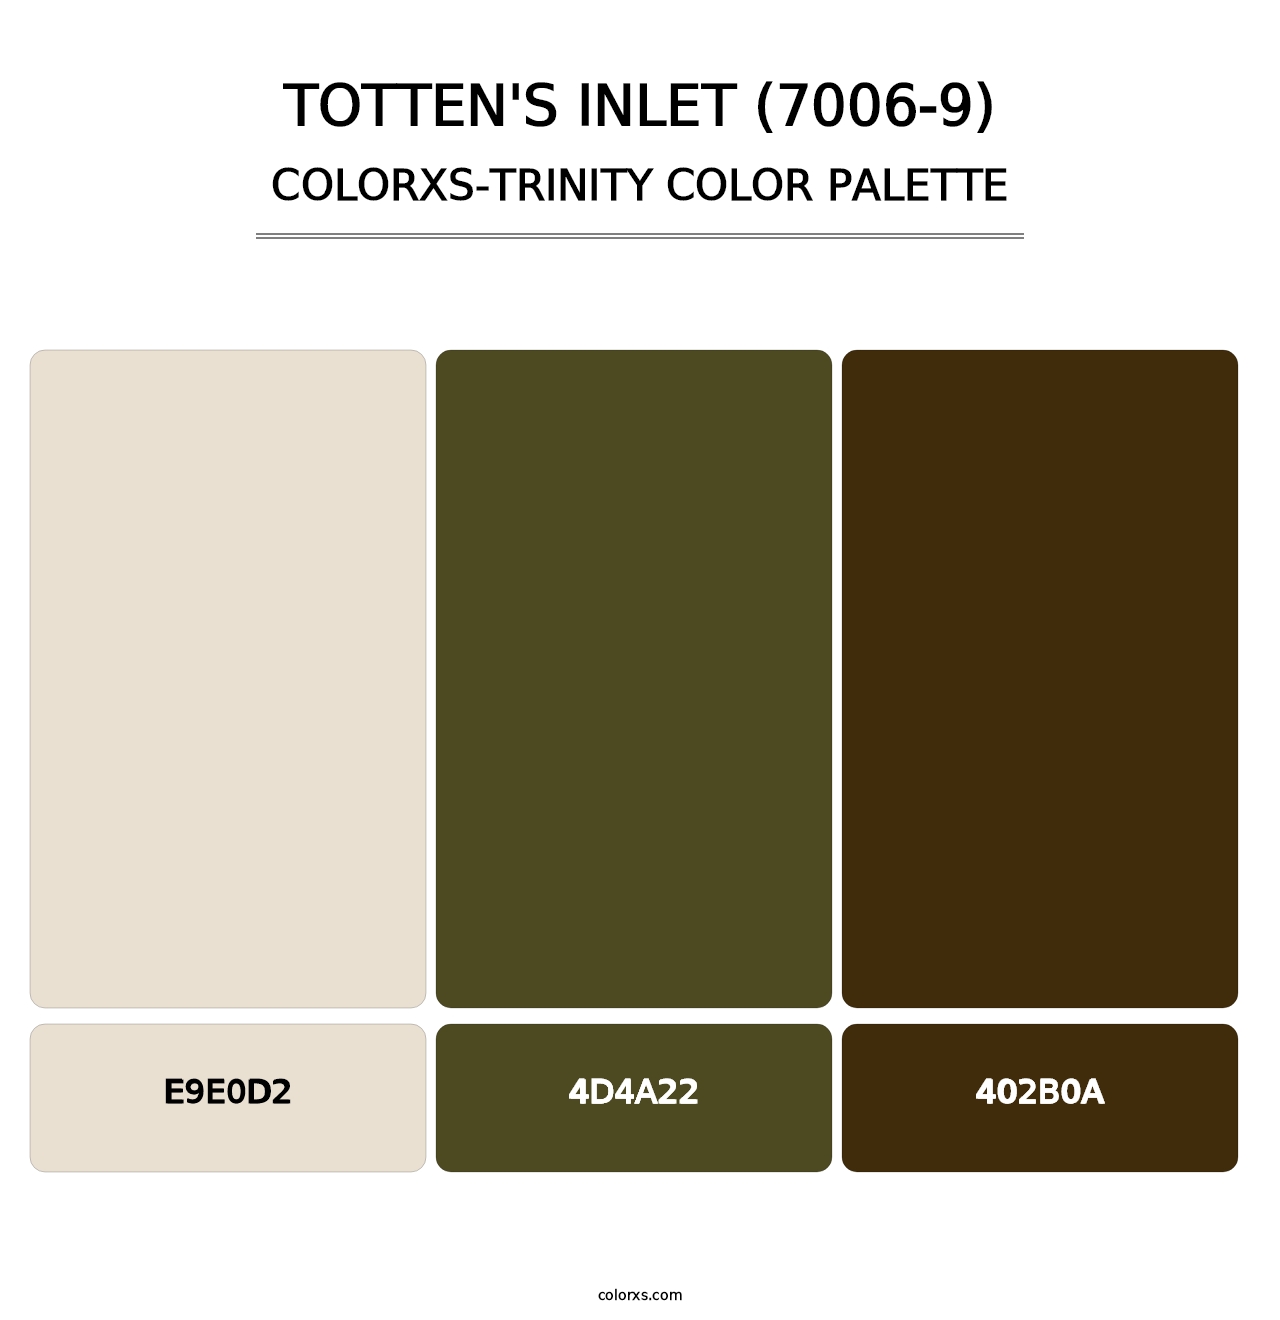 Totten's Inlet (7006-9) - Colorxs Trinity Palette